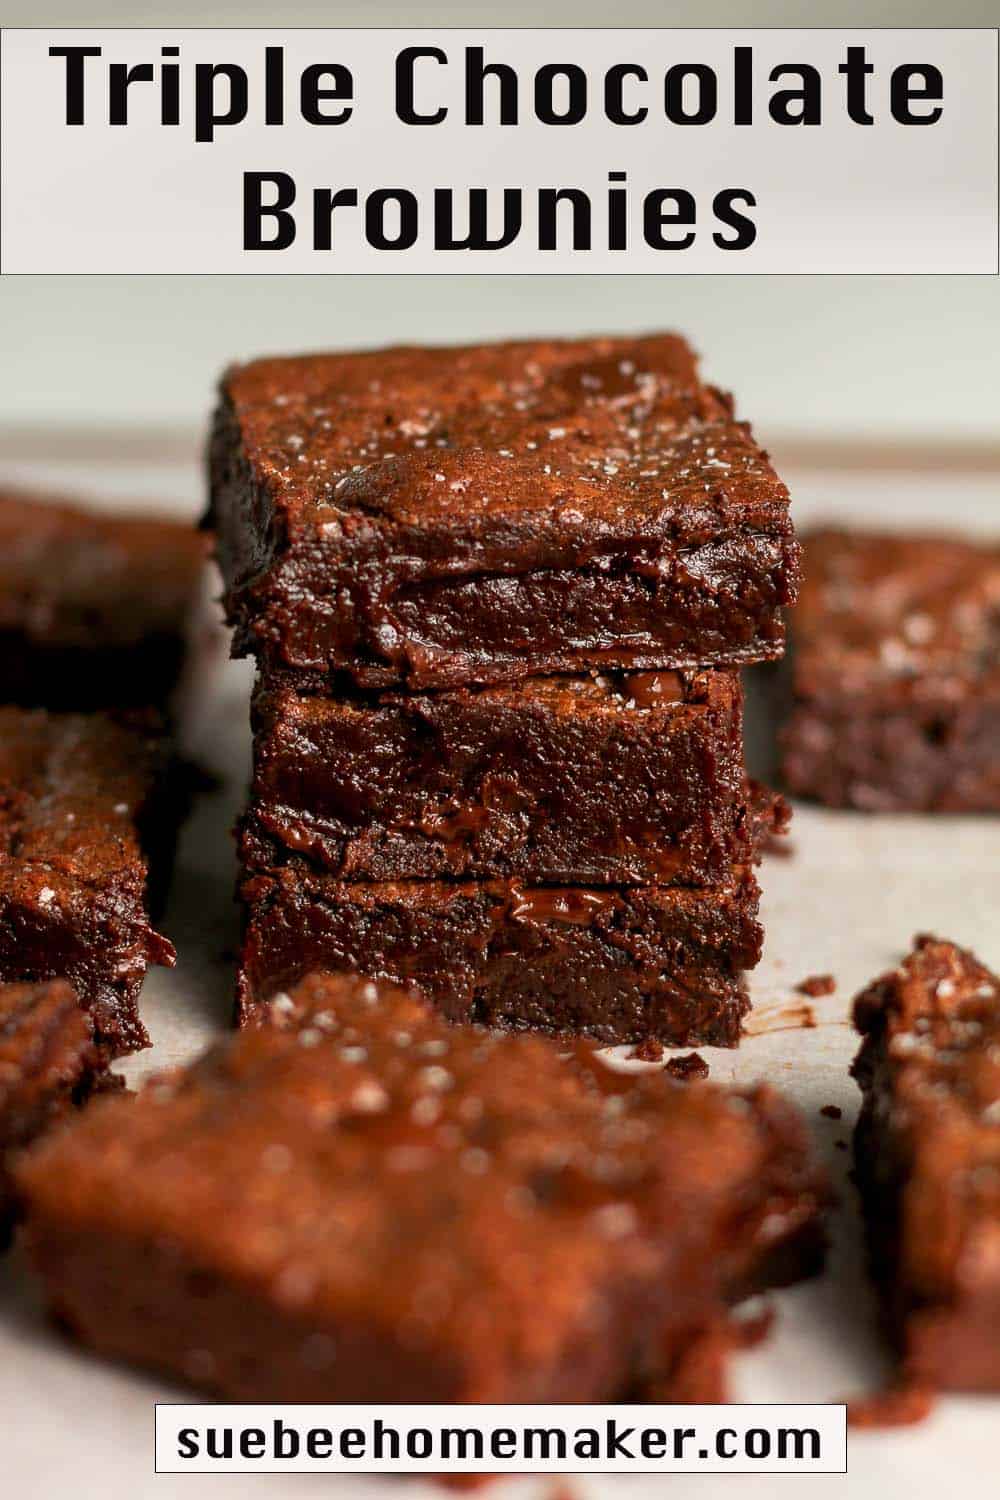 A stack of three chocolate brownies, with others surrounding.